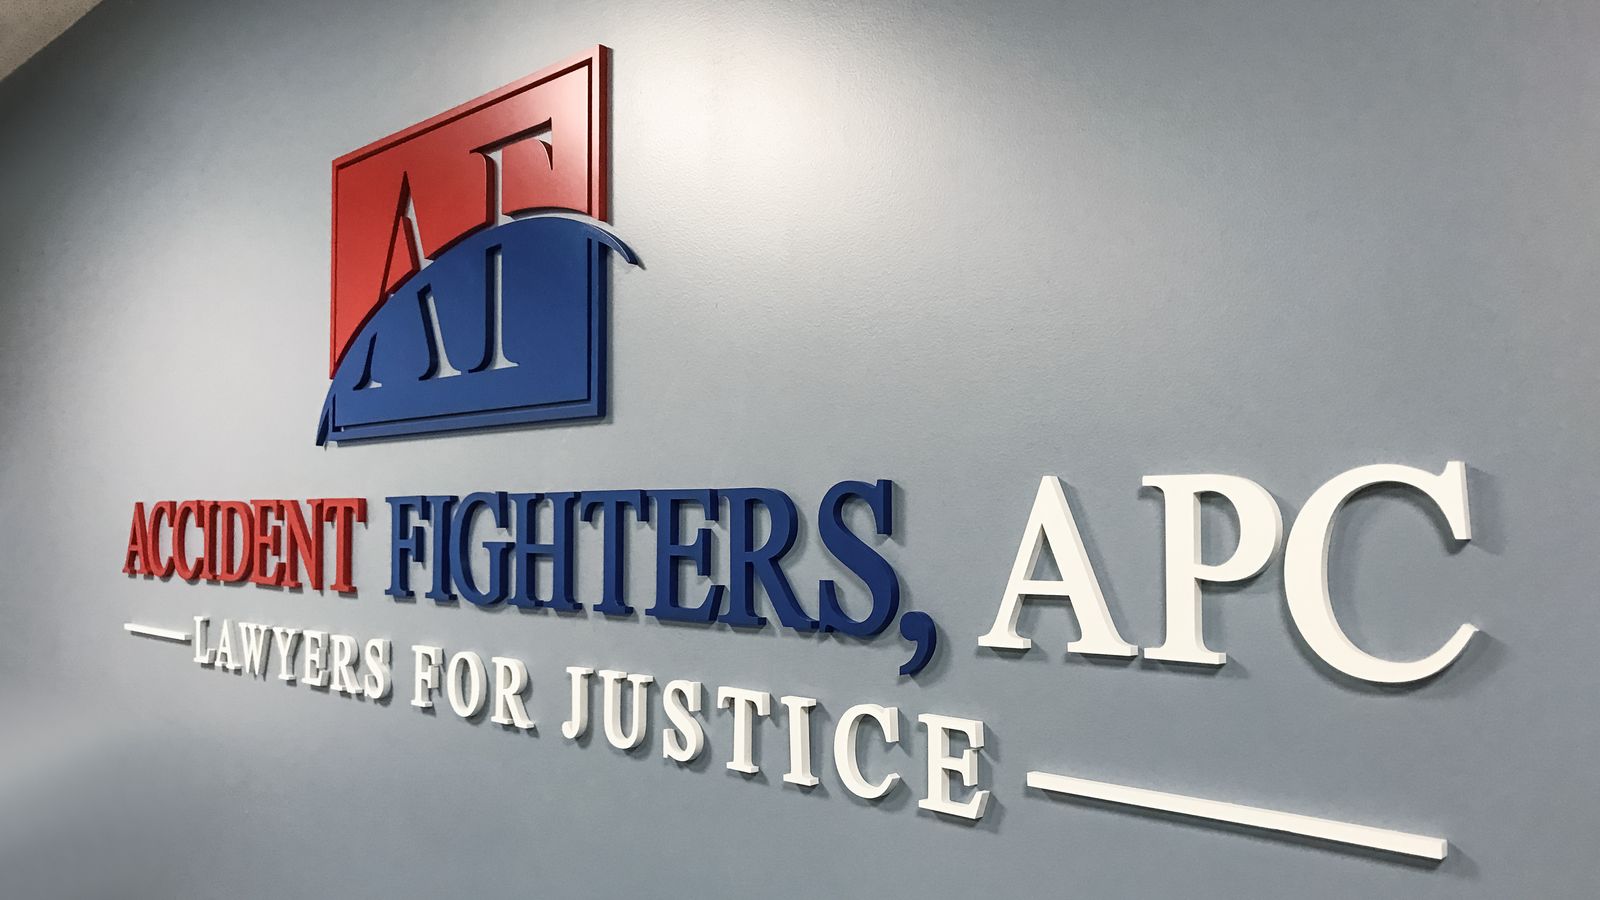 Accident Fighters, APC 3d acrylic letters and logo for office interior branding